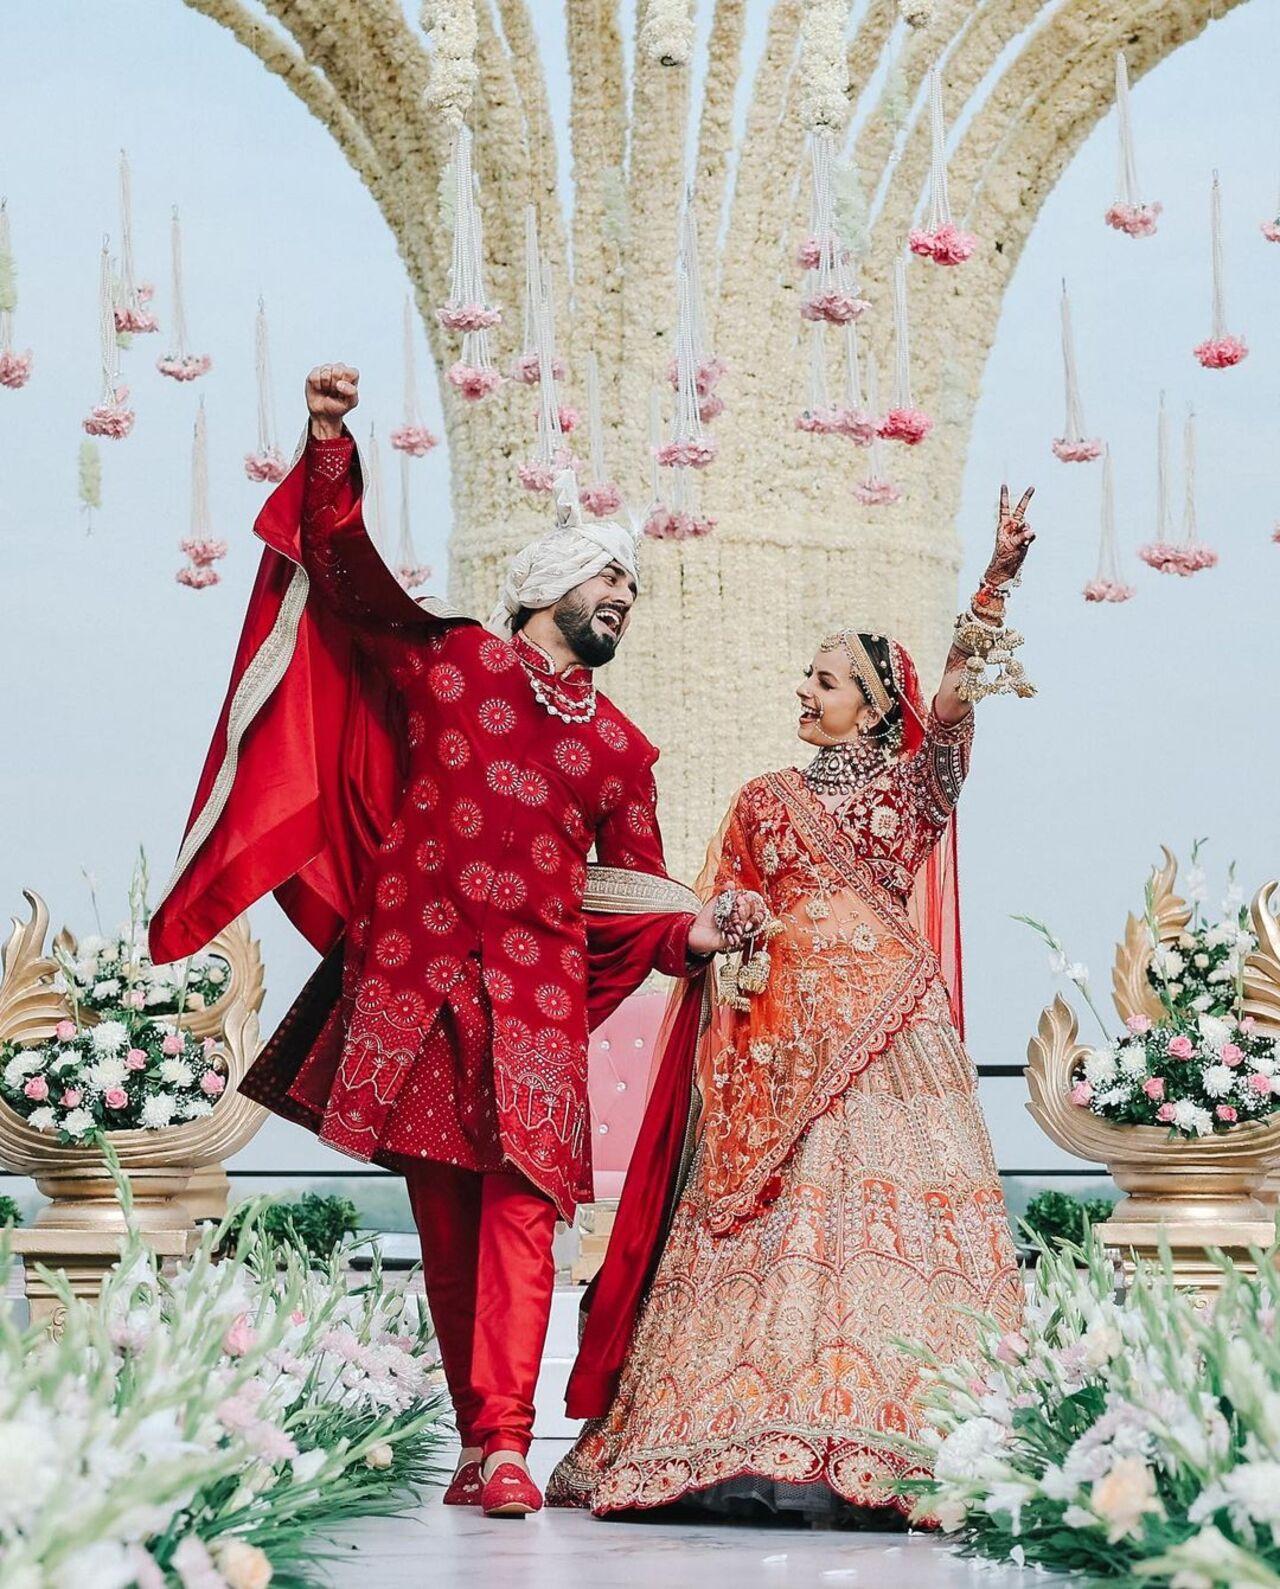 Actors Shrenu Parikh and Akshay Mhatre's wedding ceremony looked nothing short of a dream sequence of happy ending from a film